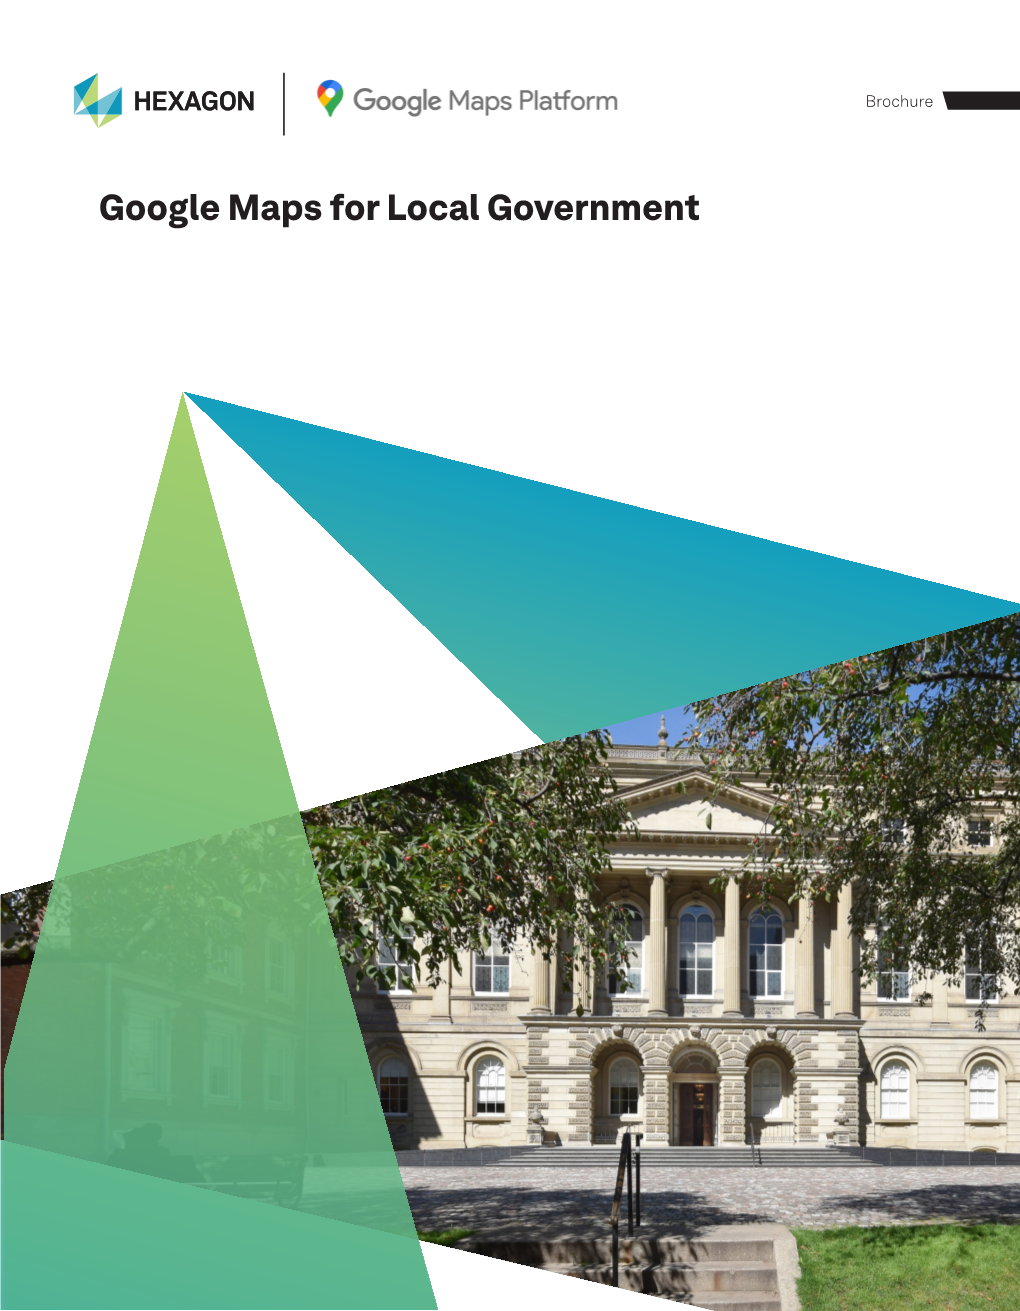 Google Maps for Local Government